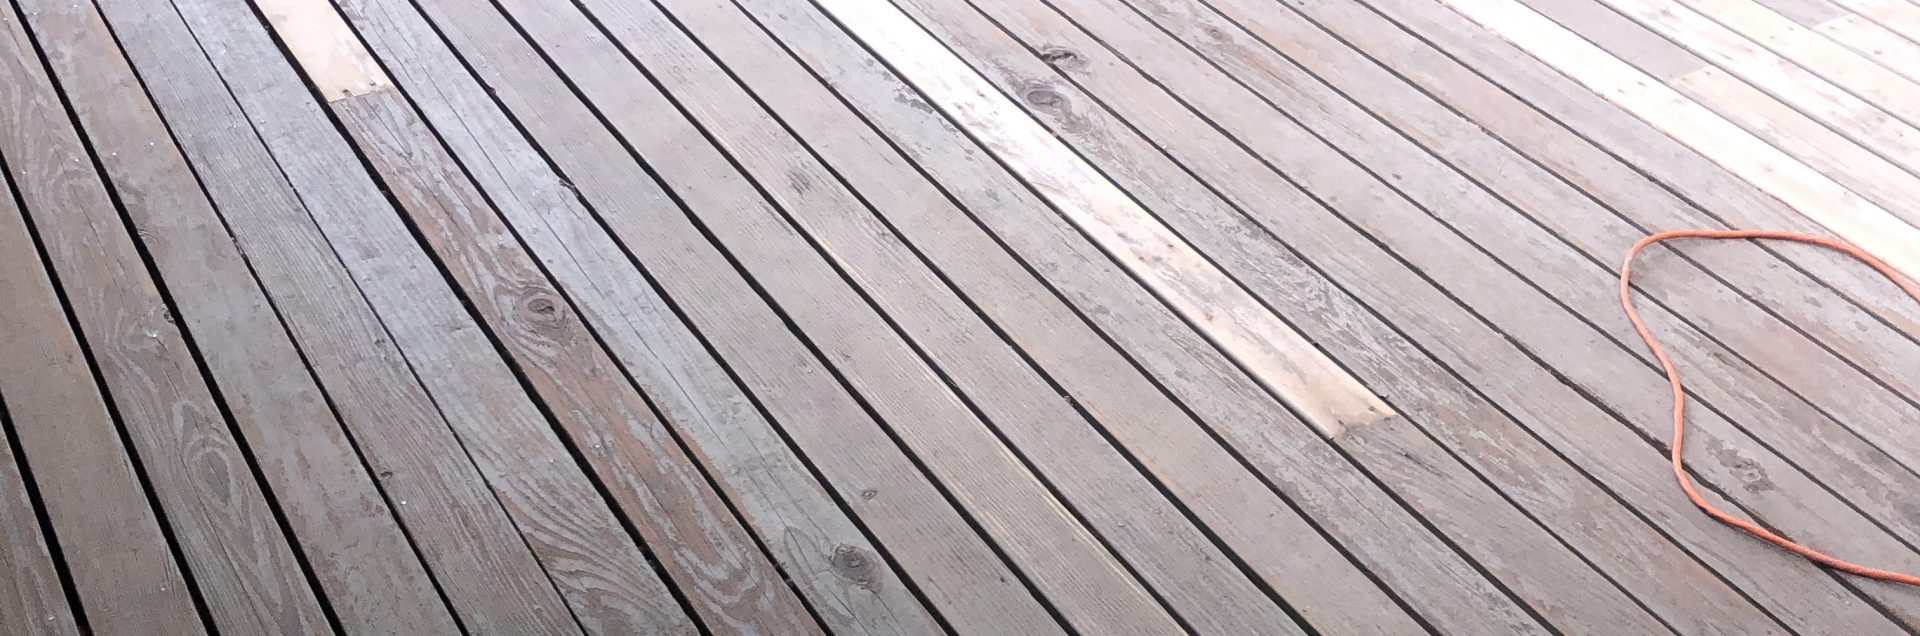 sanded deck completed by certapro painters of oswego